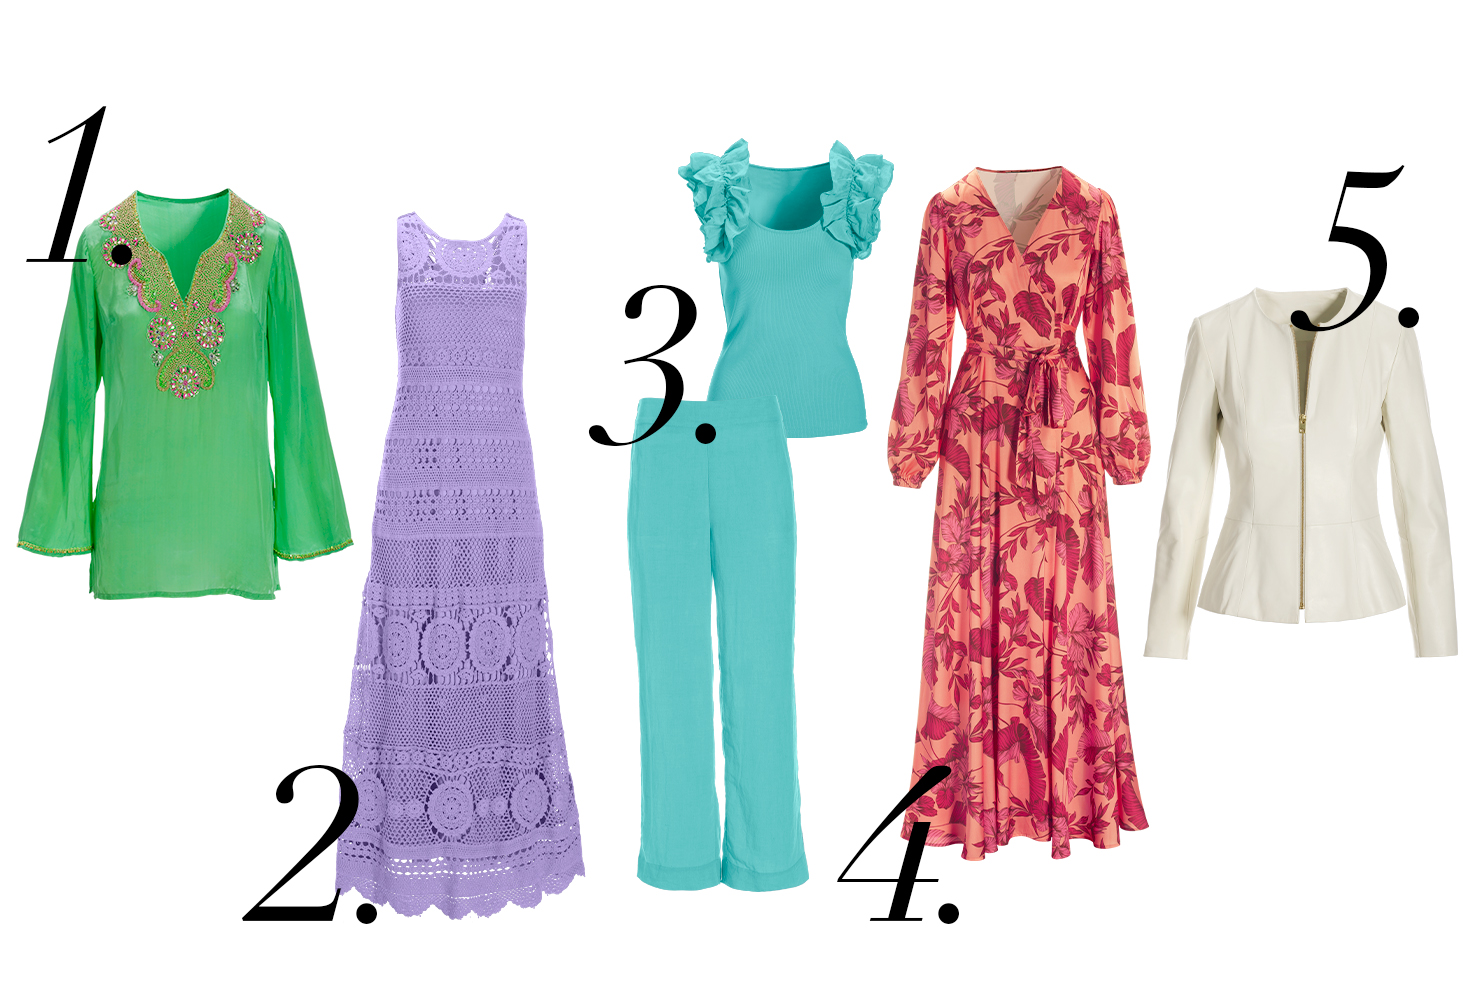 1. Green tunic with pink embellishments. 2. Lavender crochet sleeveless maxi dress. 3. Blue ruffle sleeve top and blue linen crop pants. 4. Pink floral print long-sleeve wrap dress. 5. Off-white leather peplum jacket.